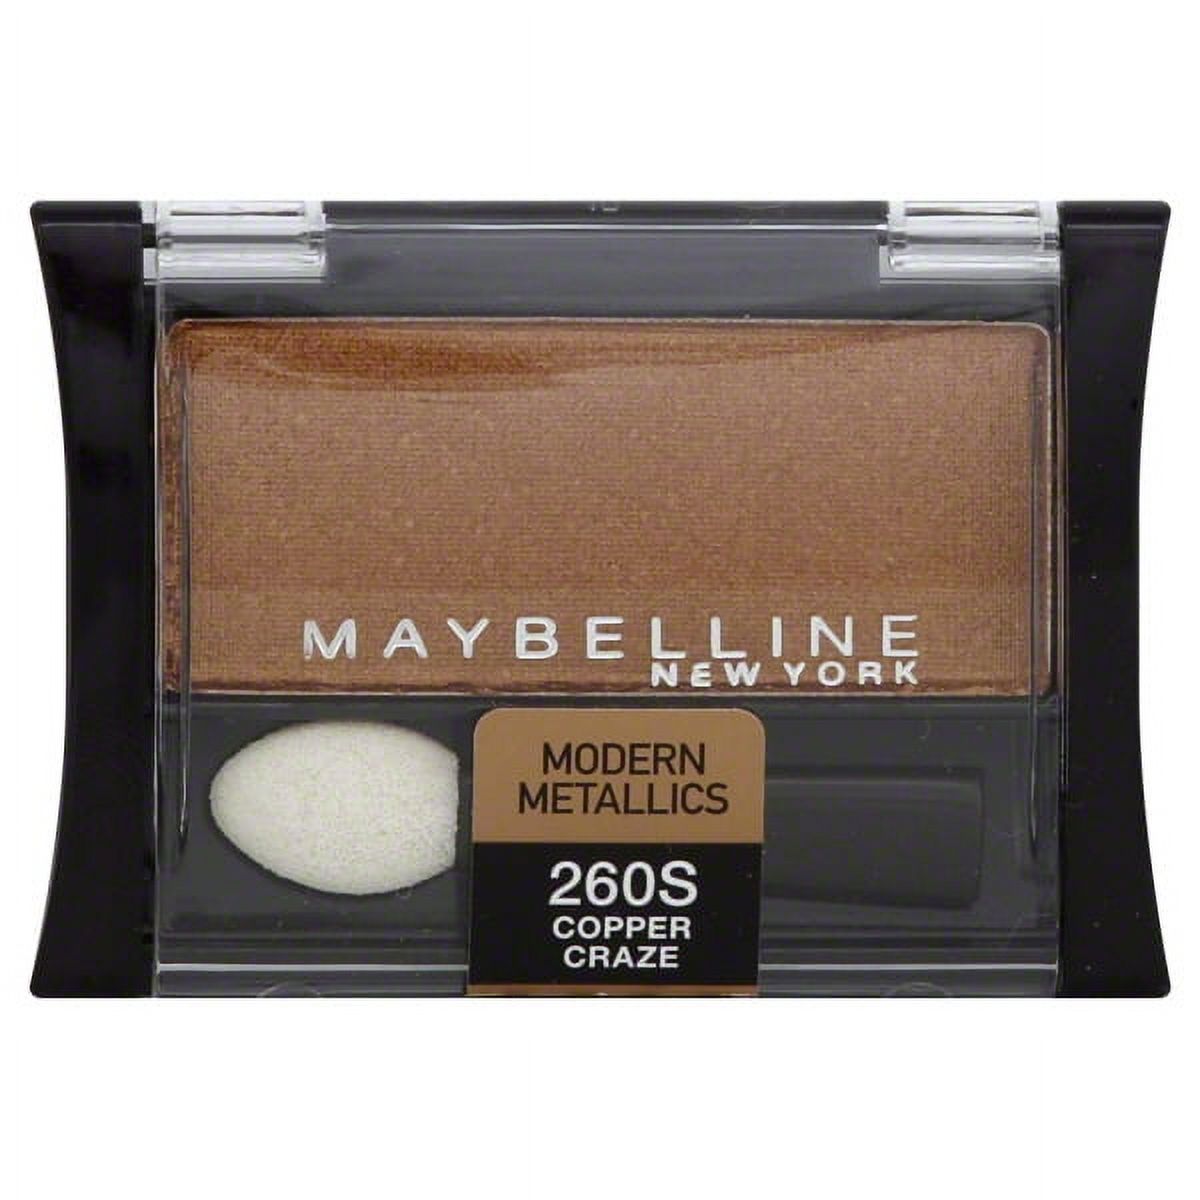 MAYBELLINE - image 1 of 67